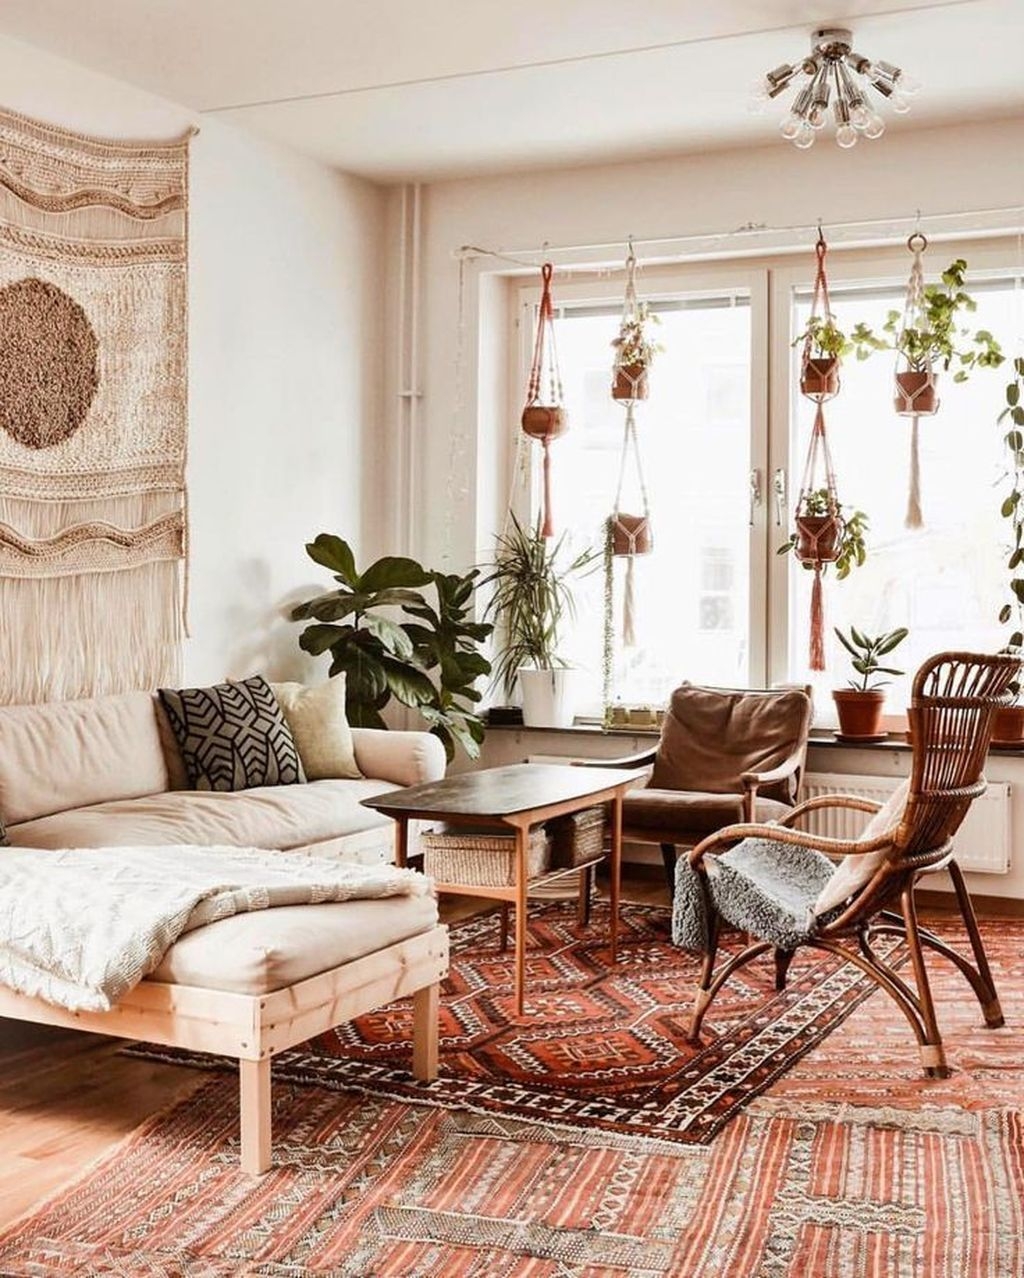 Rustic Living Room Decoration Ideas With Bohemian Style 10